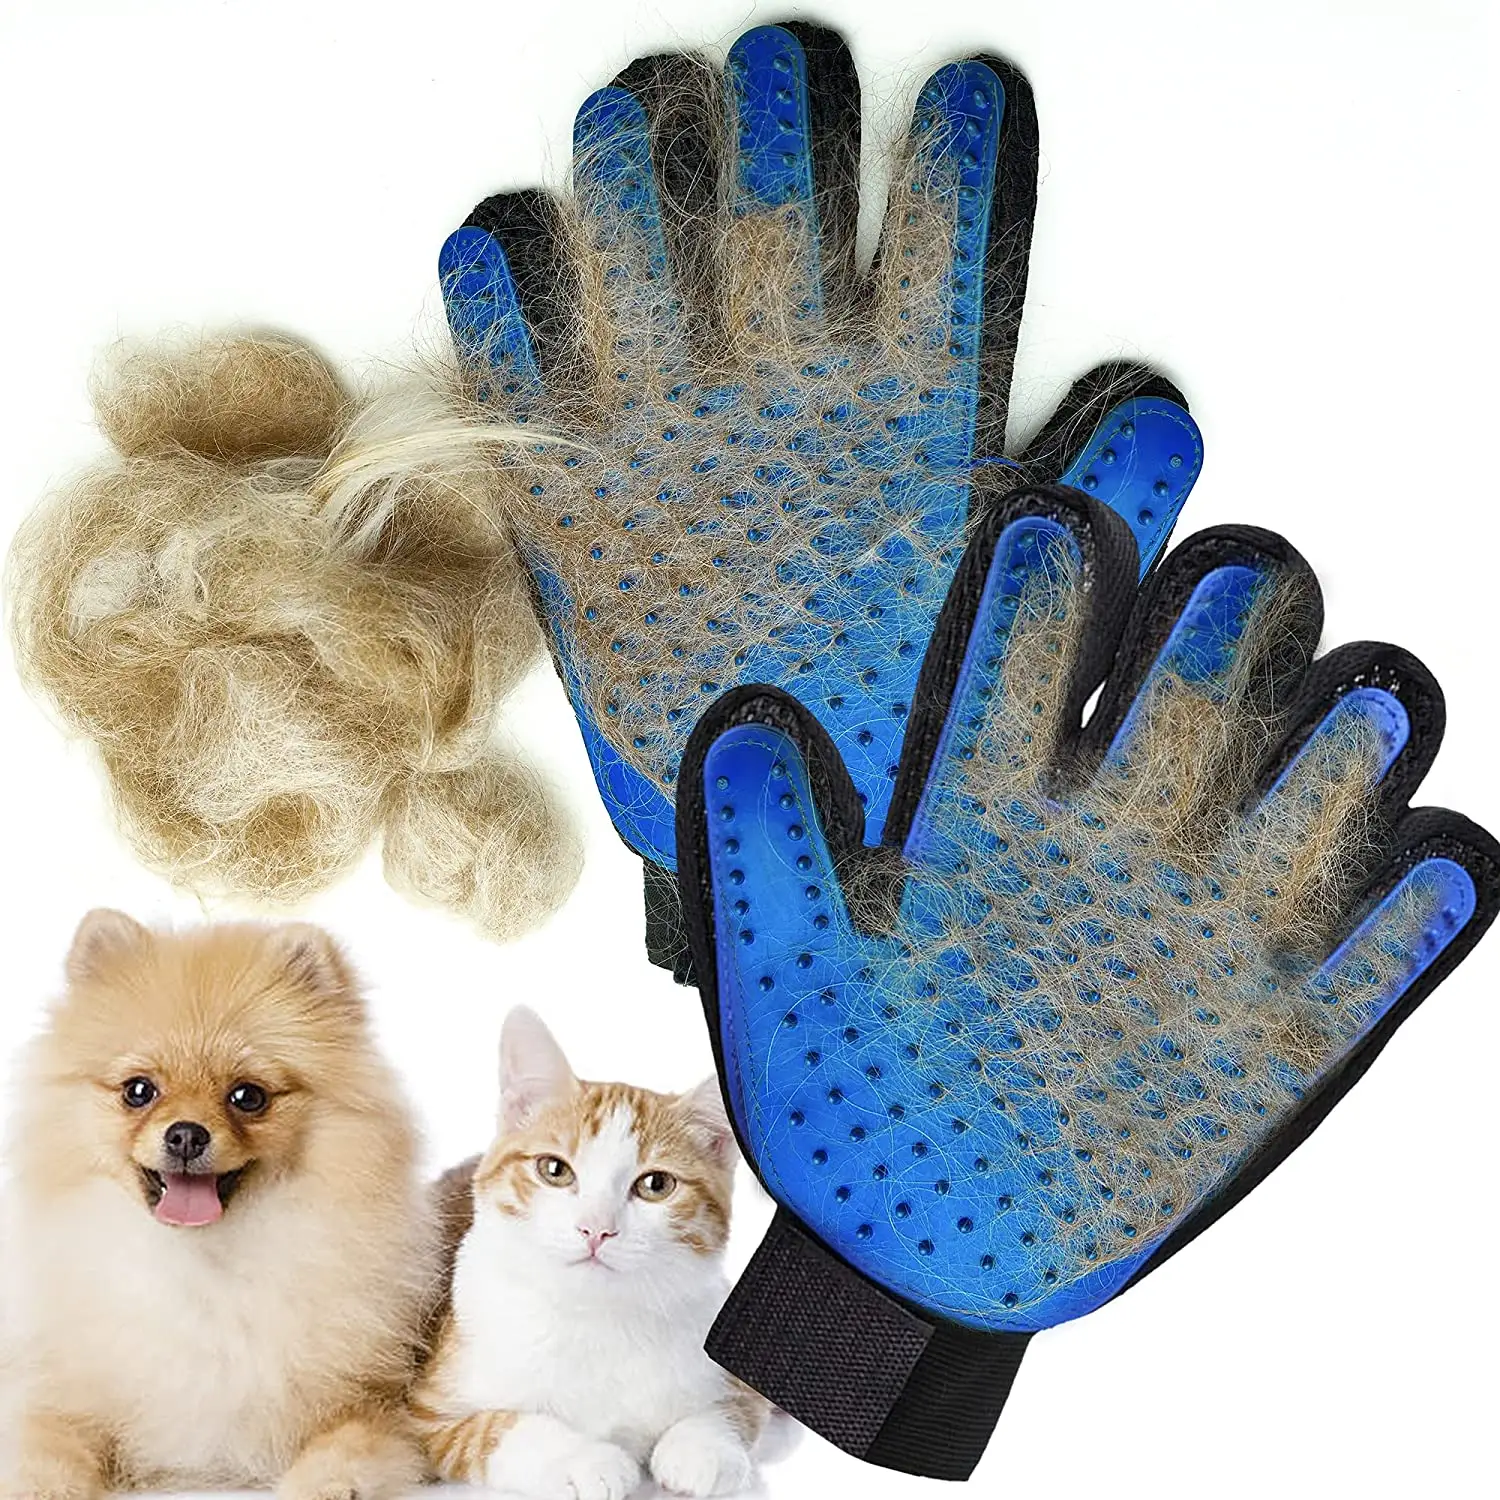 2021 New Amazon Pet Grooming Massage Tools Silicone Hair Remover Dog Glove Brush